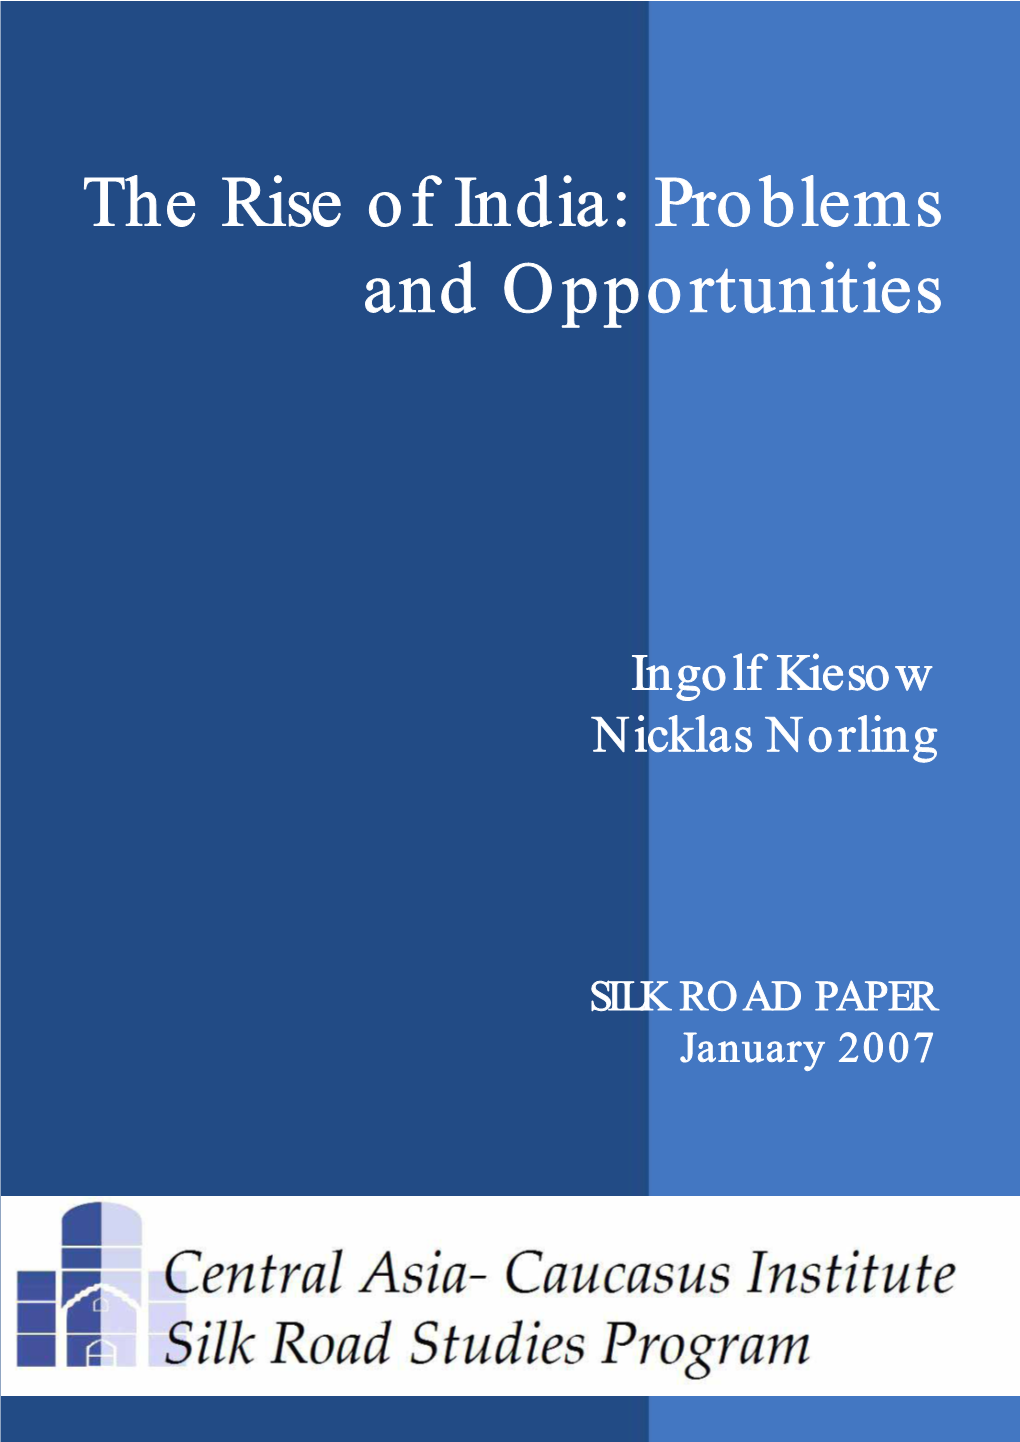 The Rise of India: Problems and Opportunities